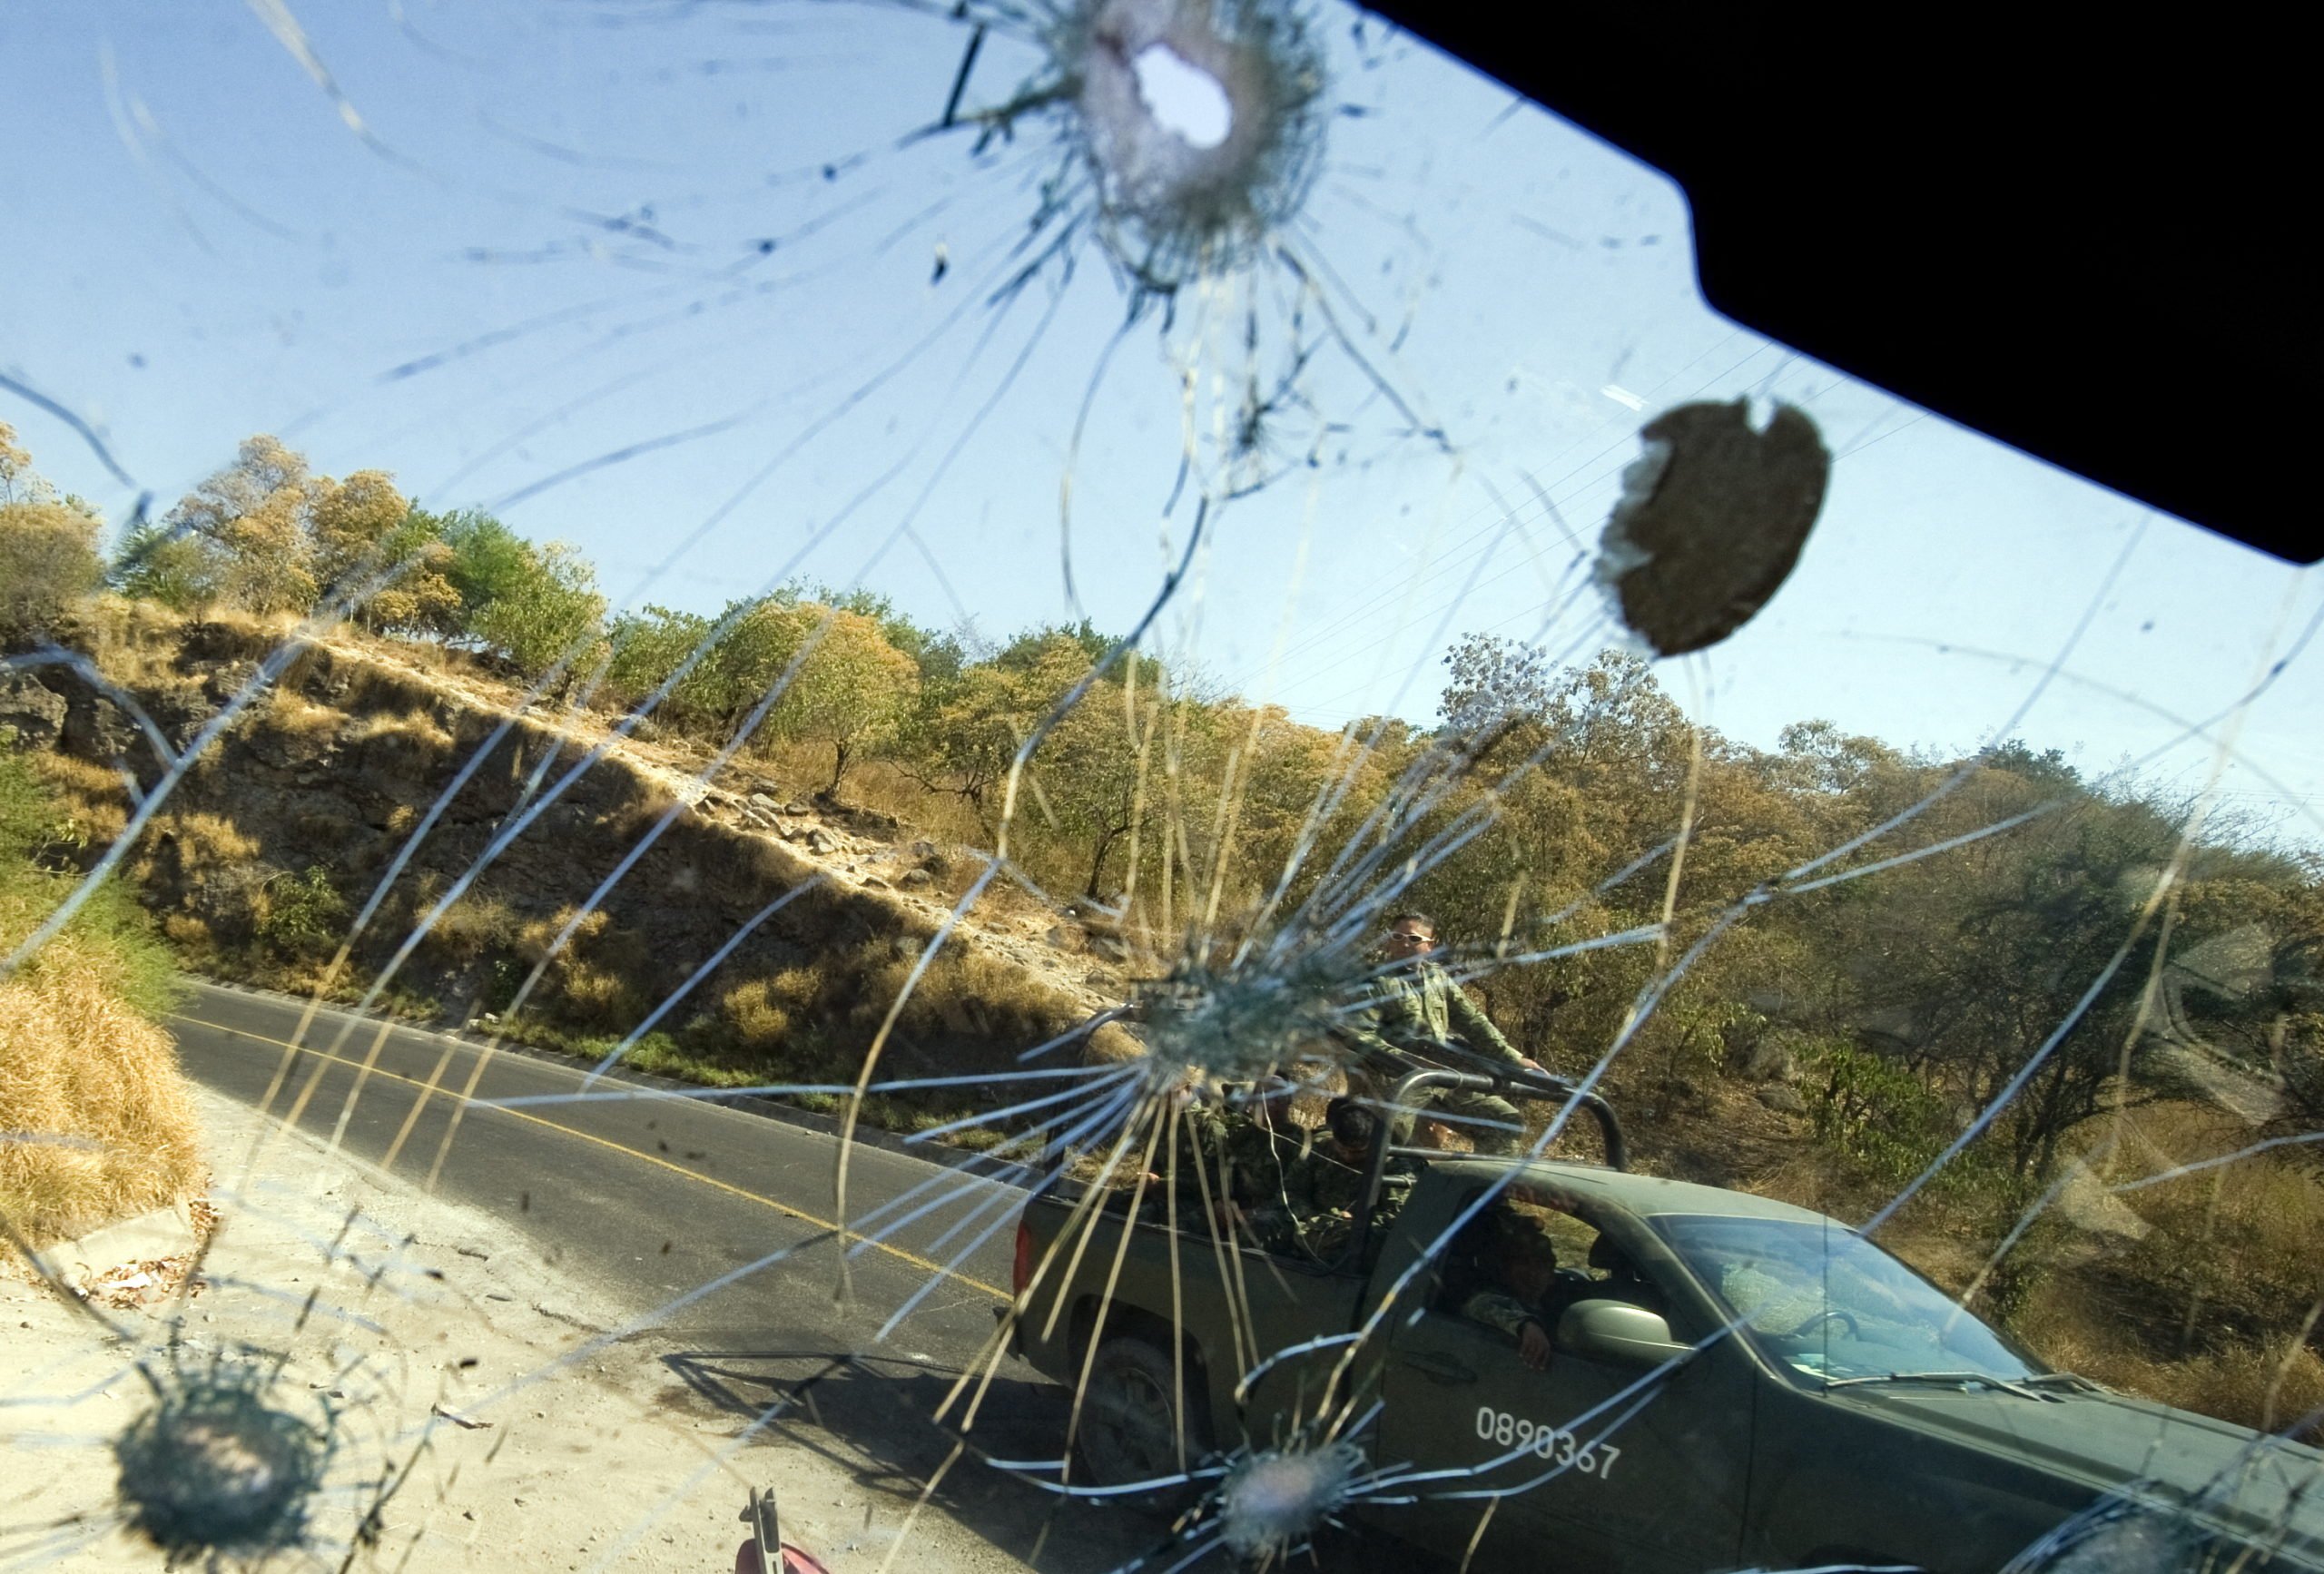 Mexican Army soldiers passing by are seen through the bullet-riddled windshield of a truck in Apatzingan, Michoacan State, Mexico, on December 12, 2010. (Photo by ALFREDO ESTRELLA/AFP via Getty Images)